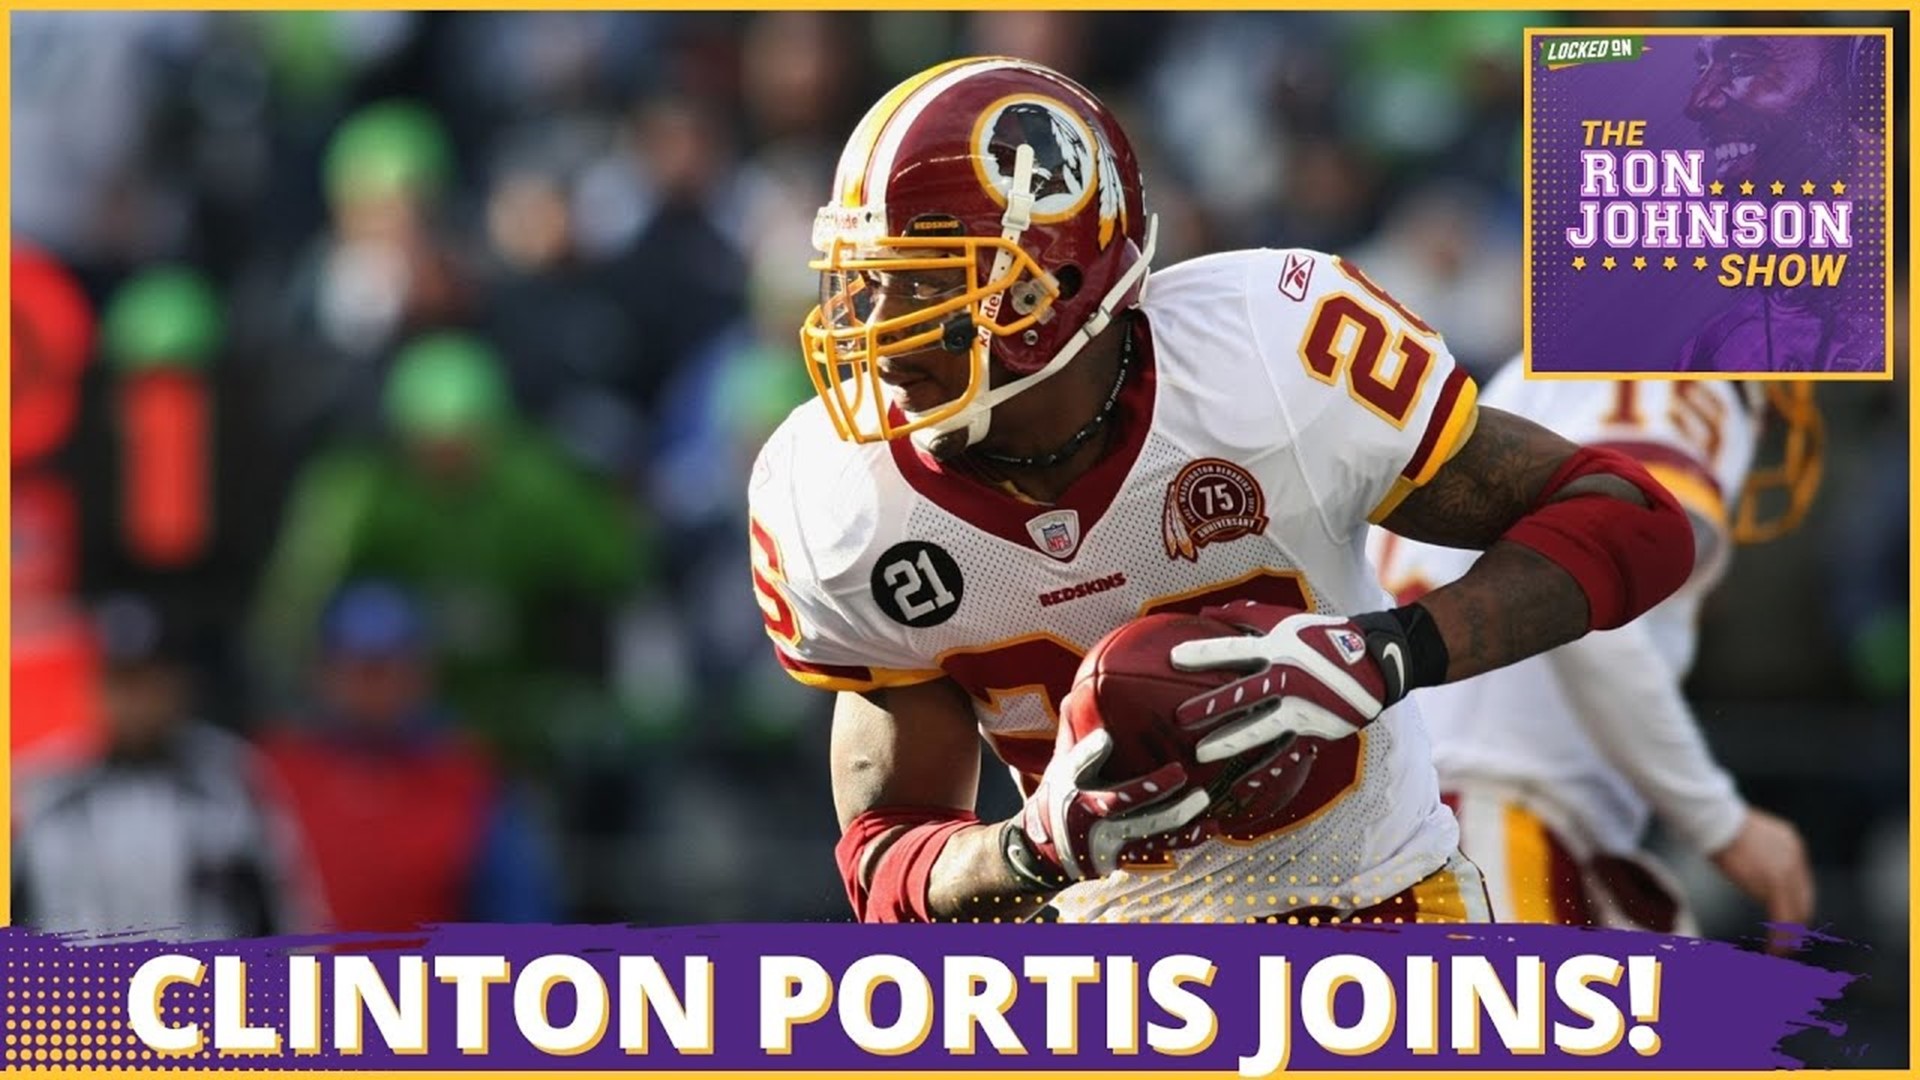 Clinton Portis OPENS UP About NFL Career and Life After Football. The Ron Johnson Show